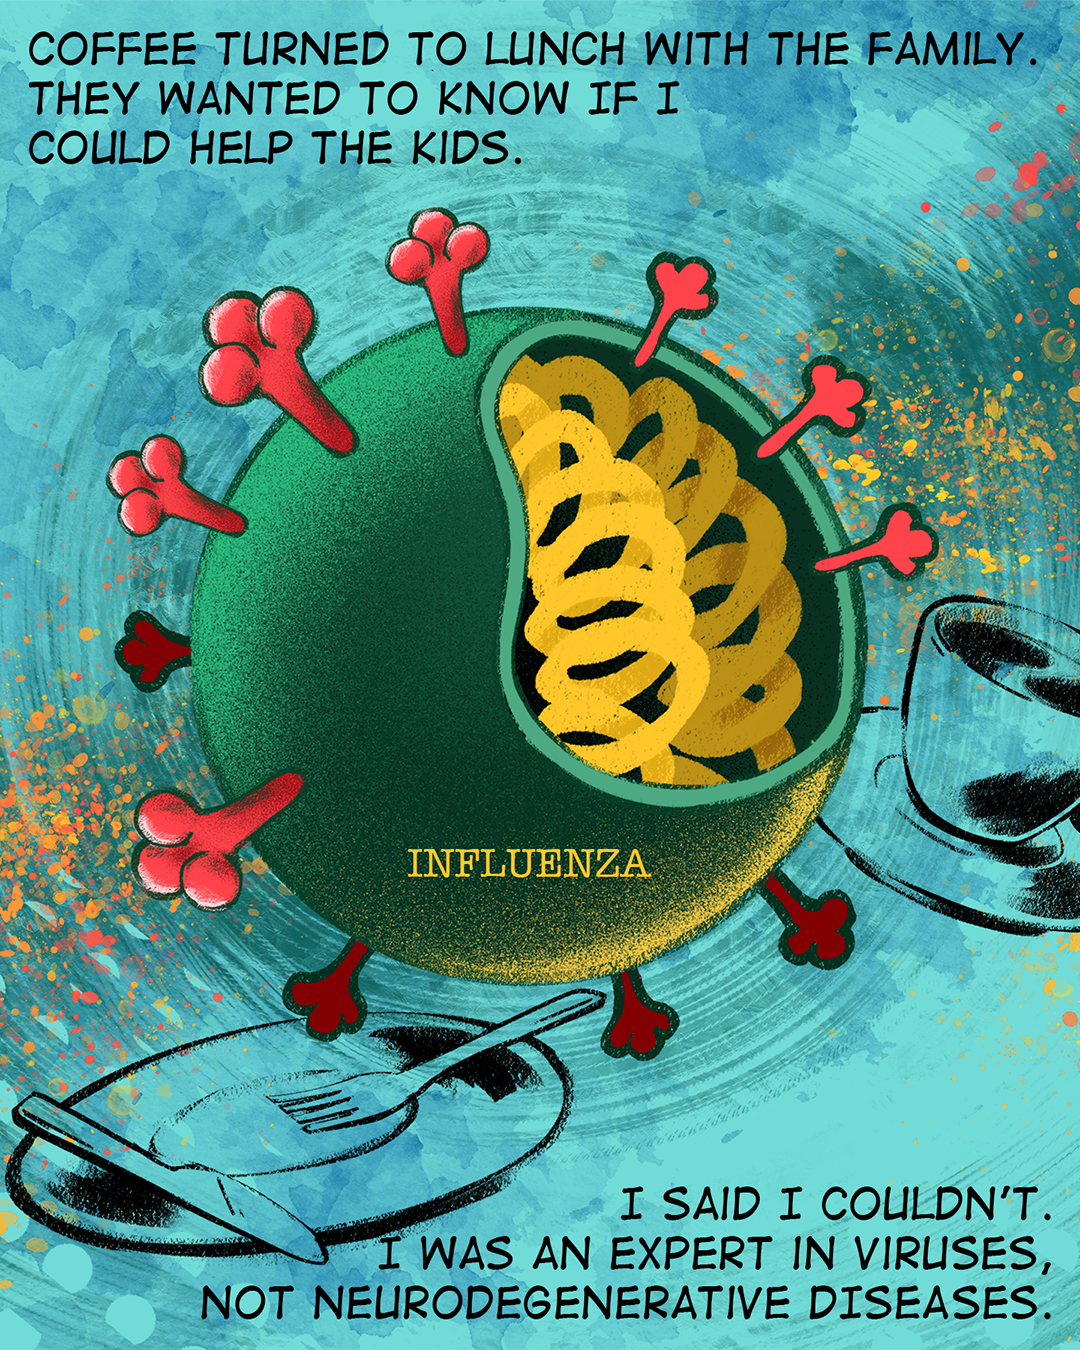 Illustration of influenza, in the background is a coffee cup and plate with knife and fork